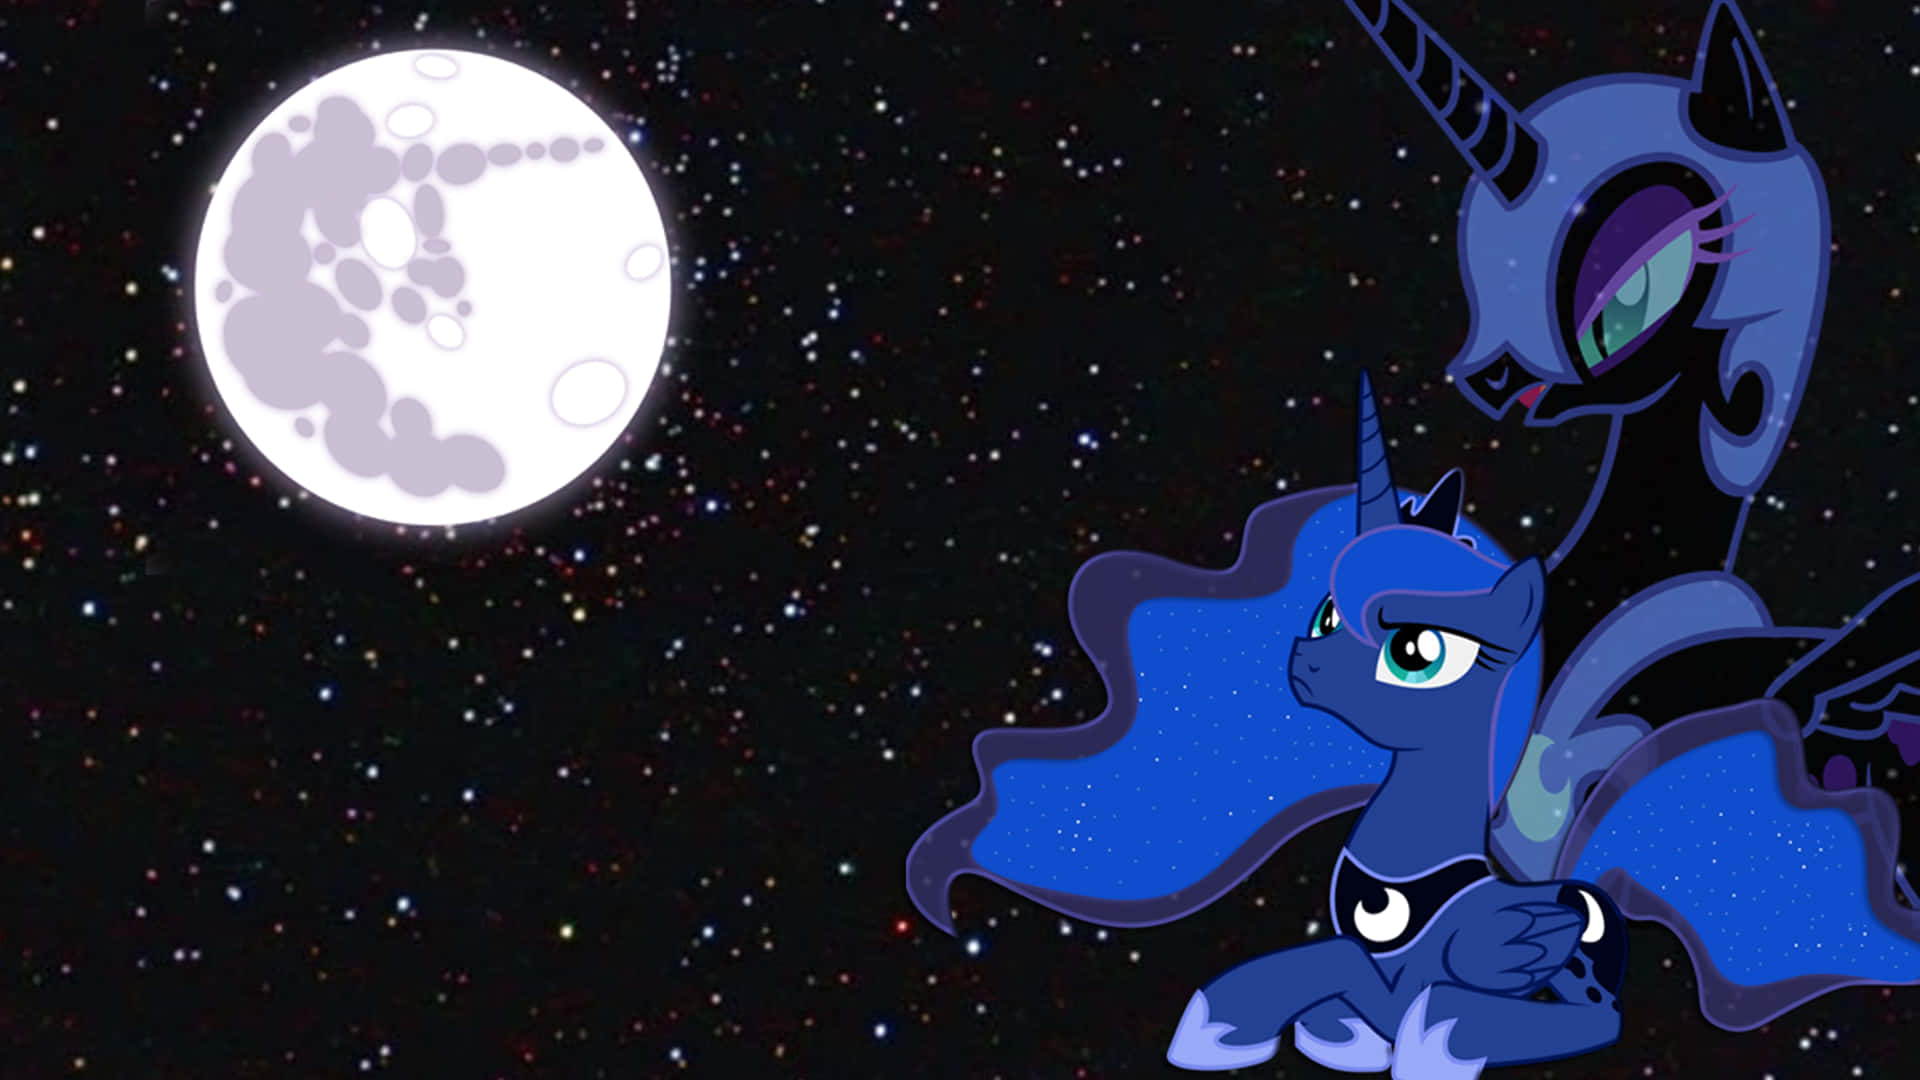 The Shadow Of Nightmare Moon Looms Over Equestria Background